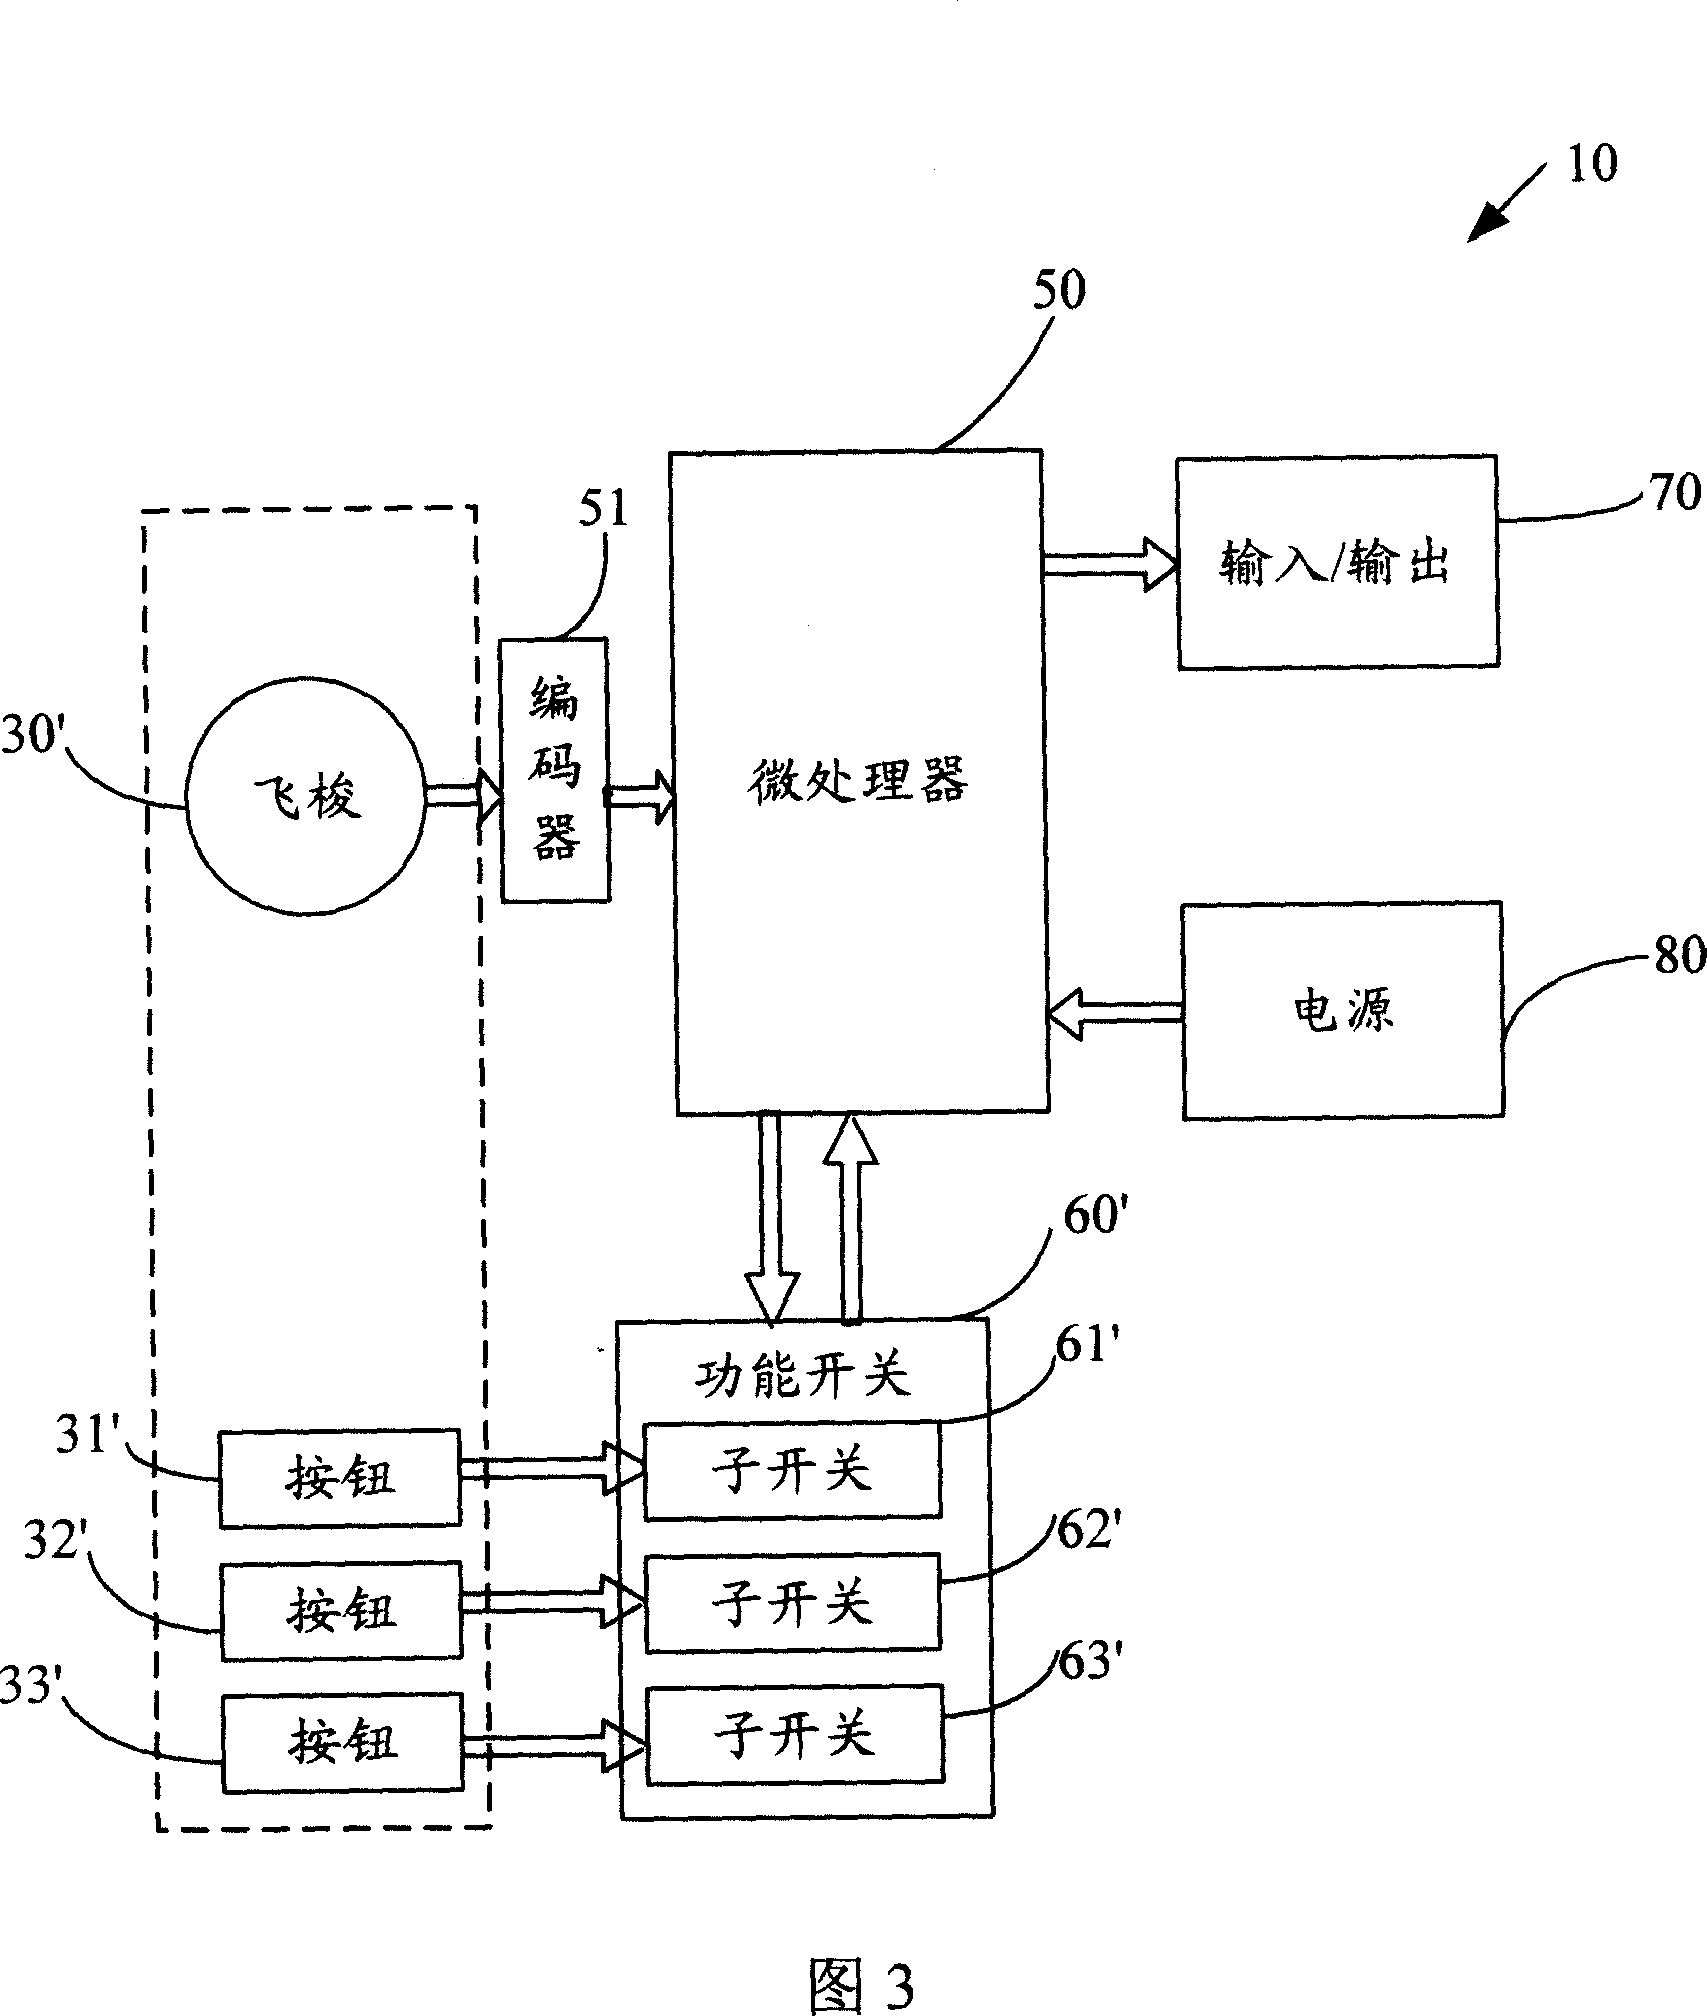 Electronic installation with character input fly shuttle